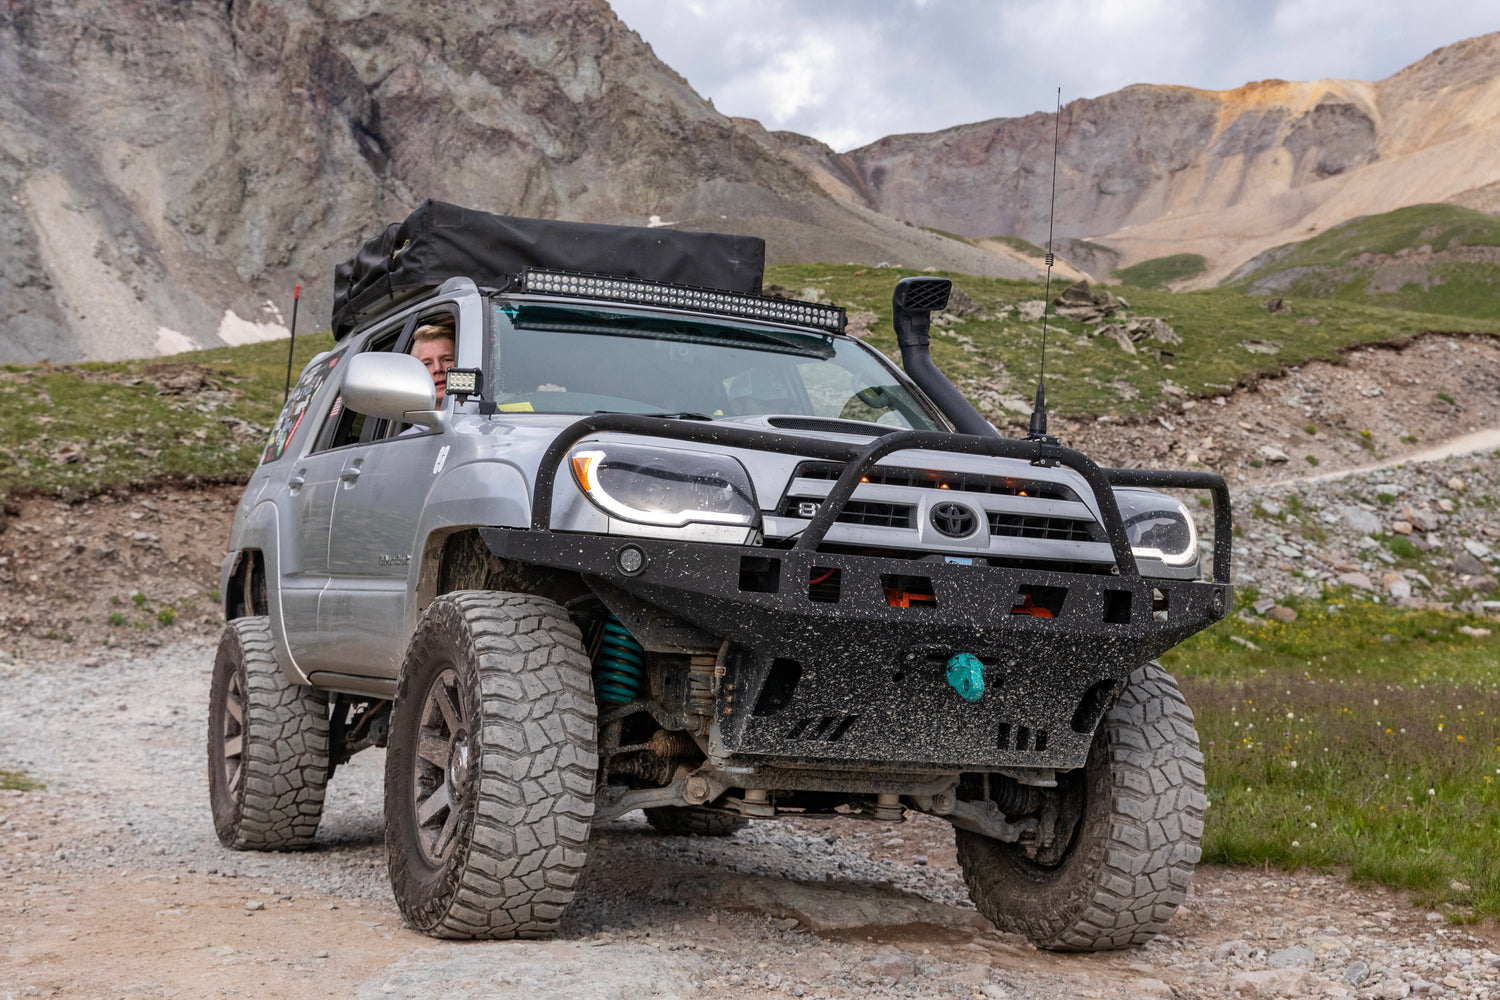 Toyota 4th gen 4runner front bumper with roof rack a lift kit and mods done to the interior and exterior.